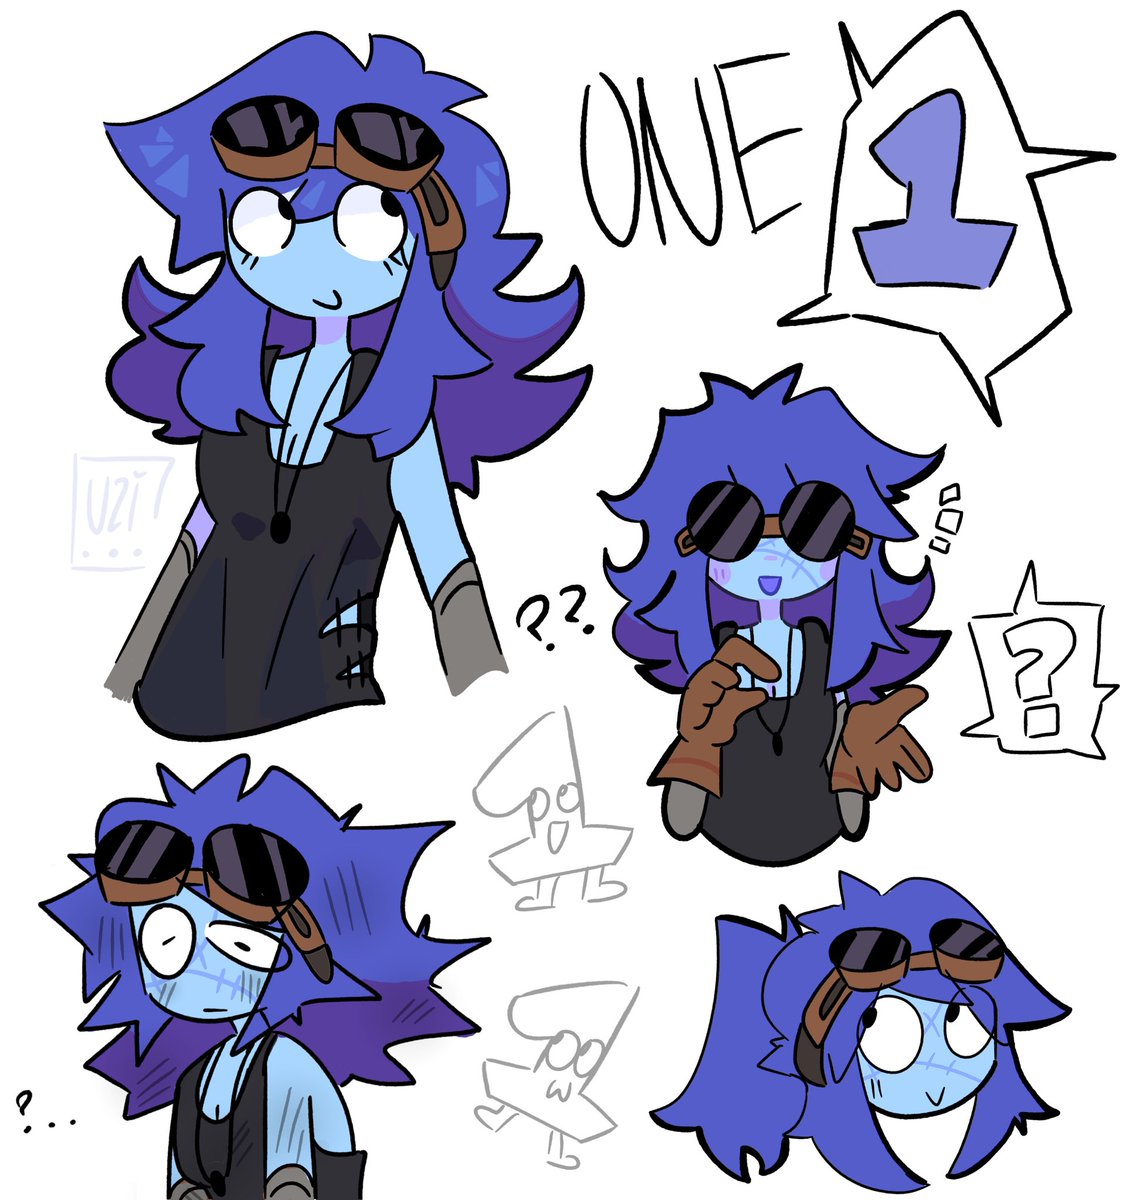 onety one one one 1111 from bfdi, yay
#bfdi #tpot #osc